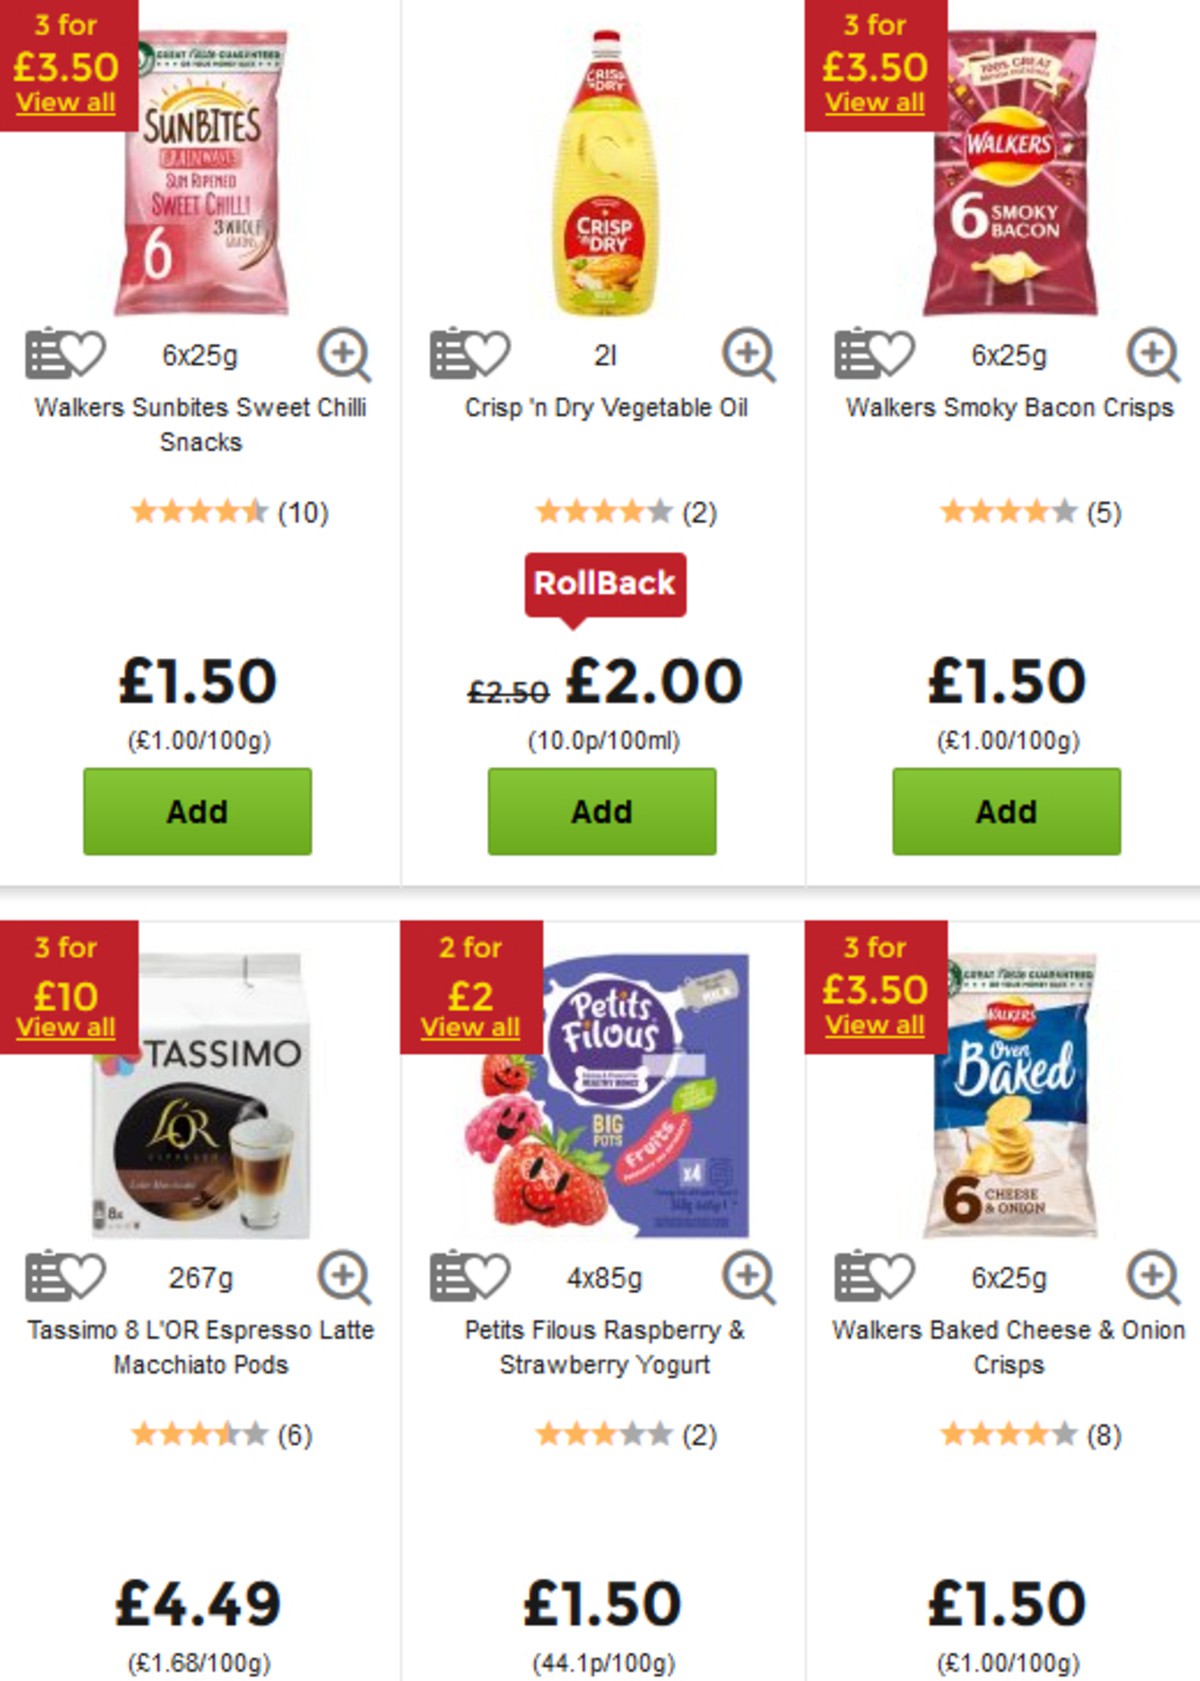 ASDA Offers from 3 May